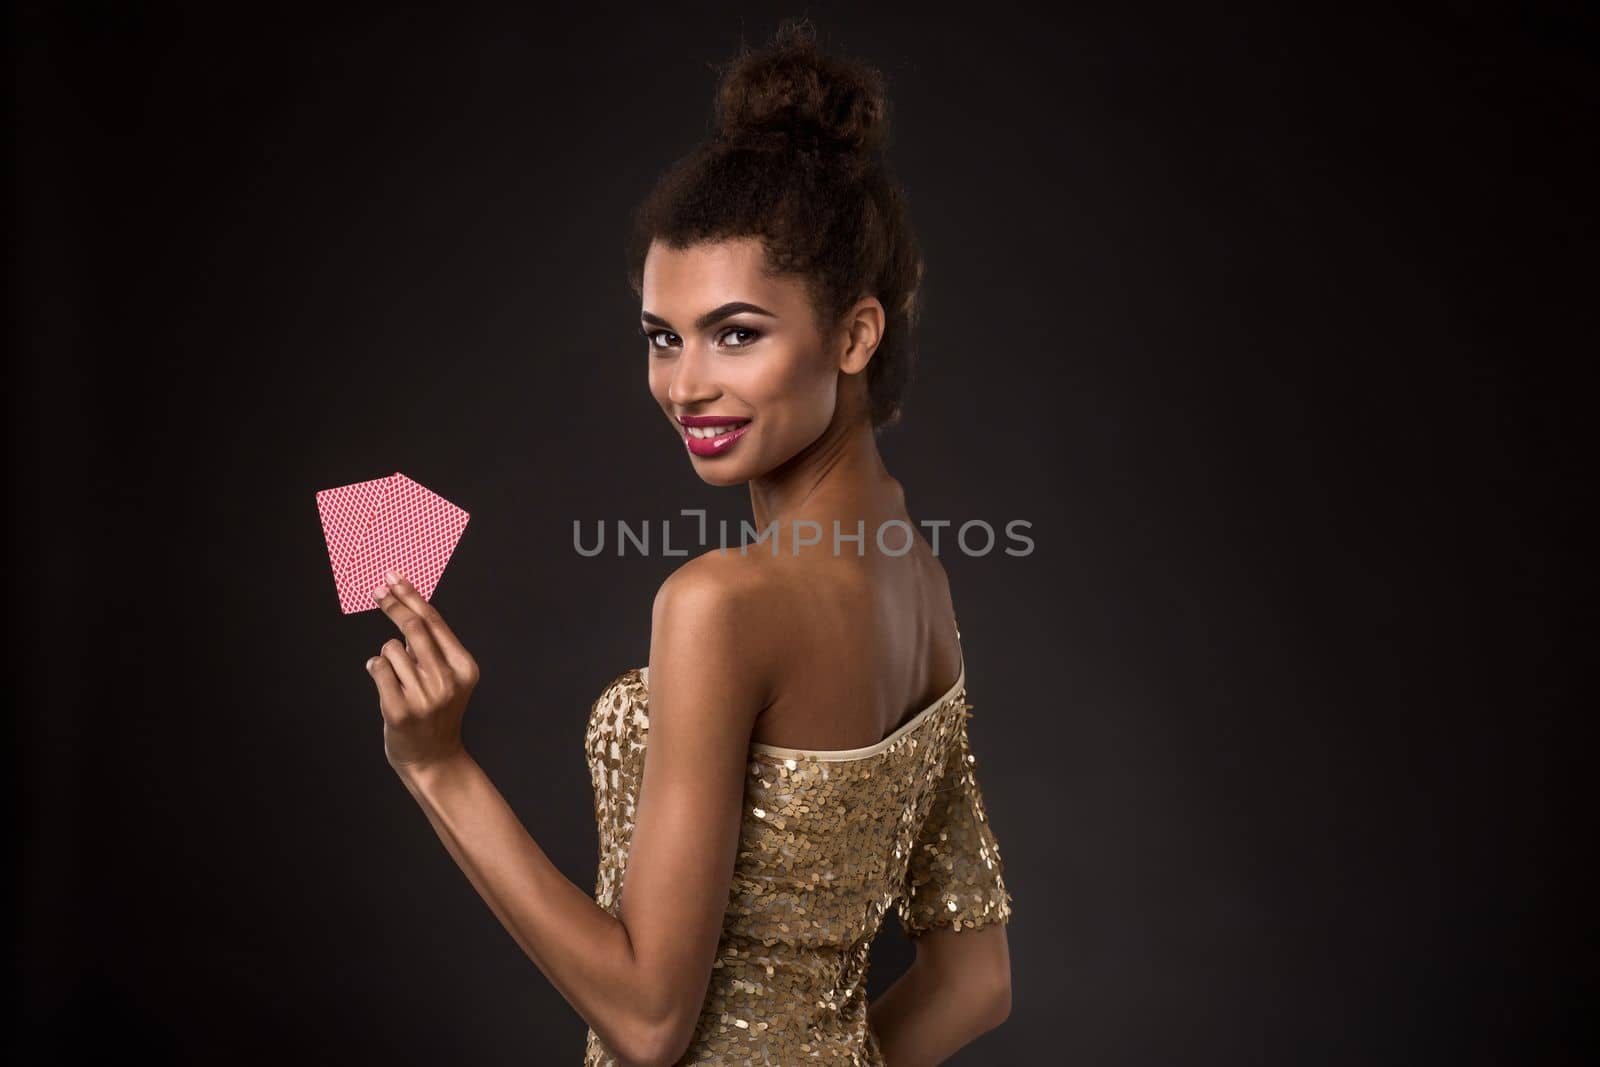 Woman winning - Young woman in a classy gold dress holding two cards, a poker of aces card combination. Studio shot on black background. A young woman stands with her back